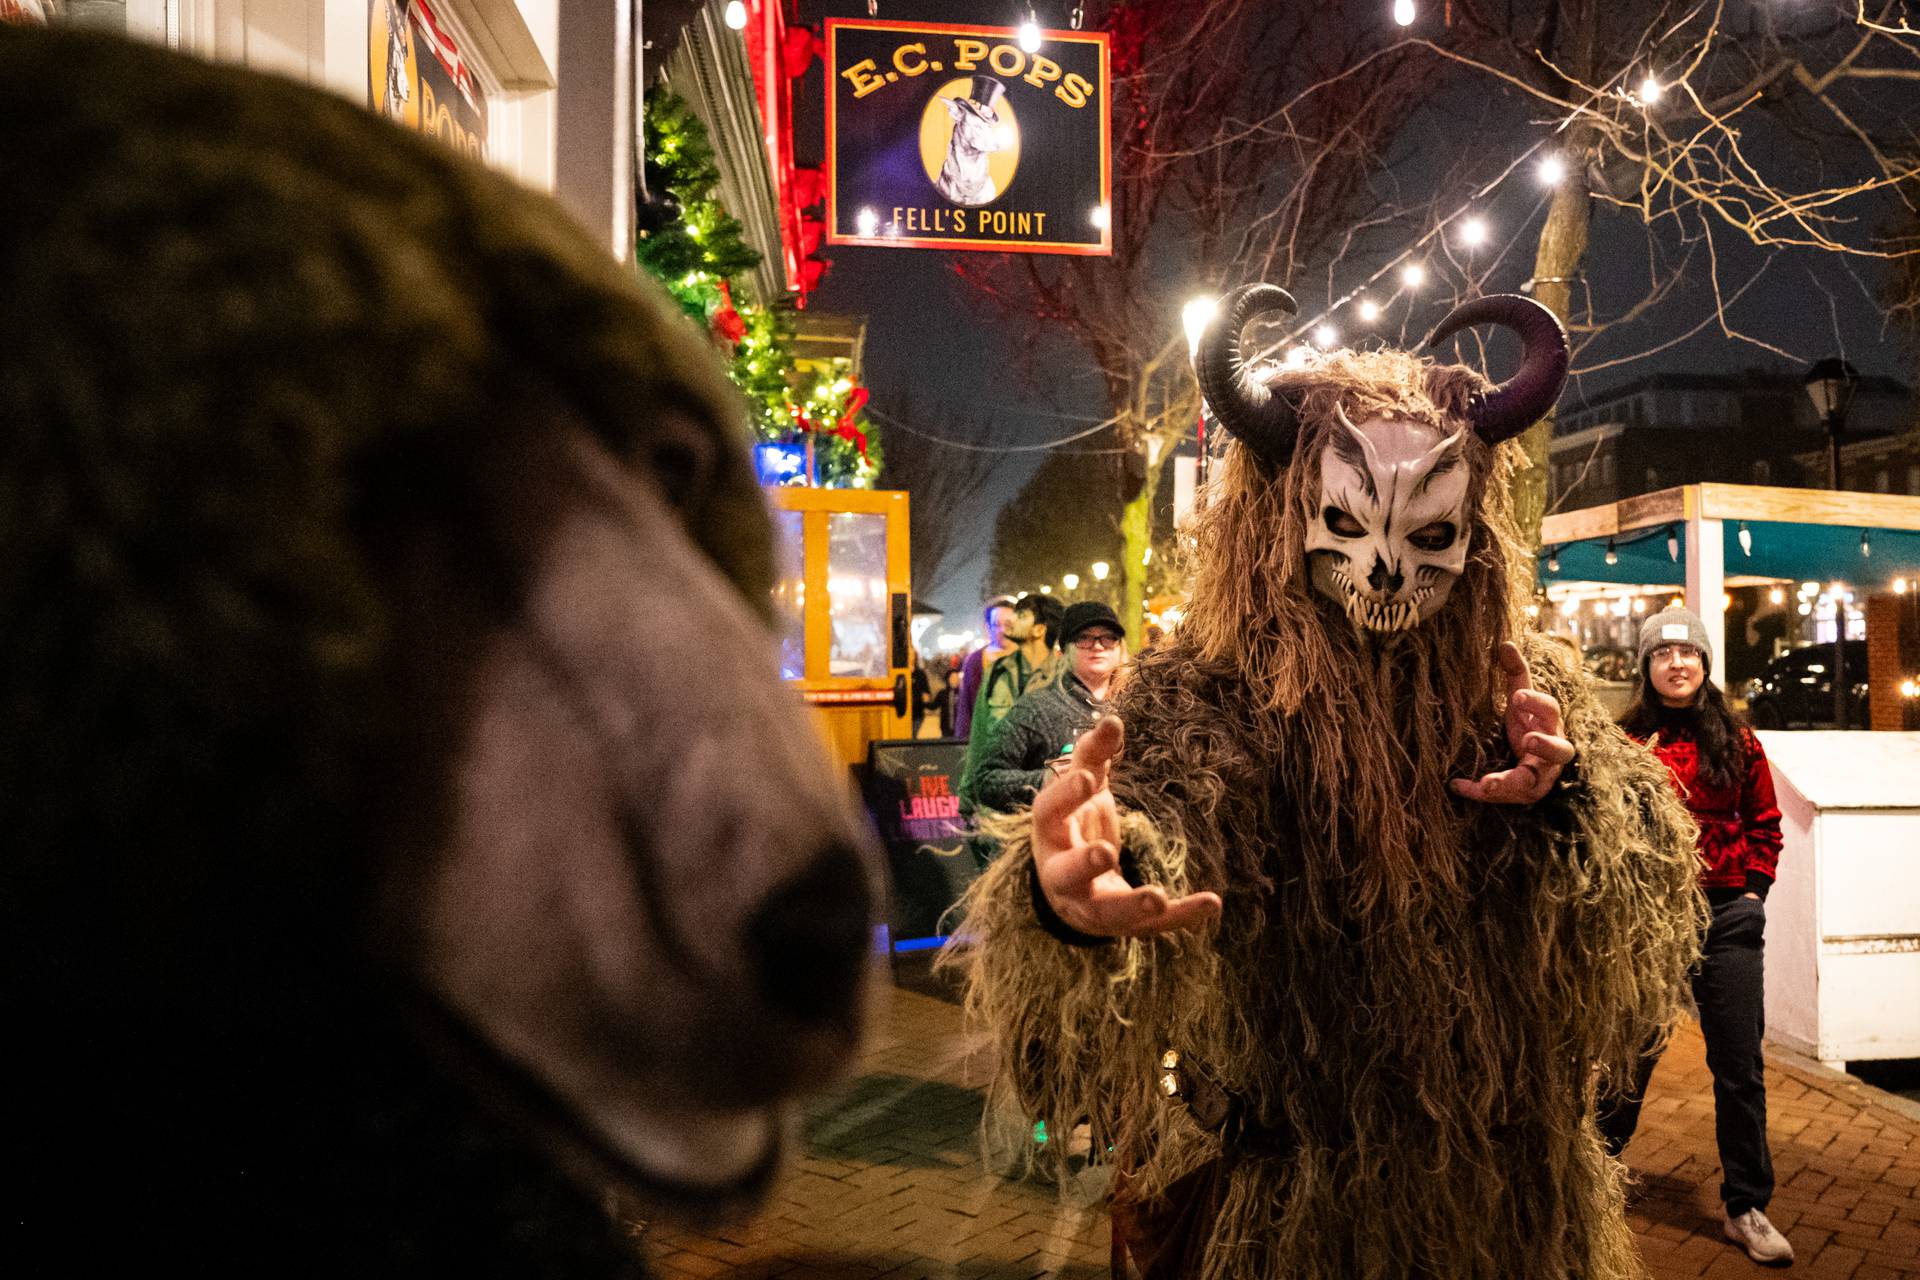 A Krampus wearing a furry moss suit extends his hands toward the camera as he walks by a stuffed bear at E.C. Pops.